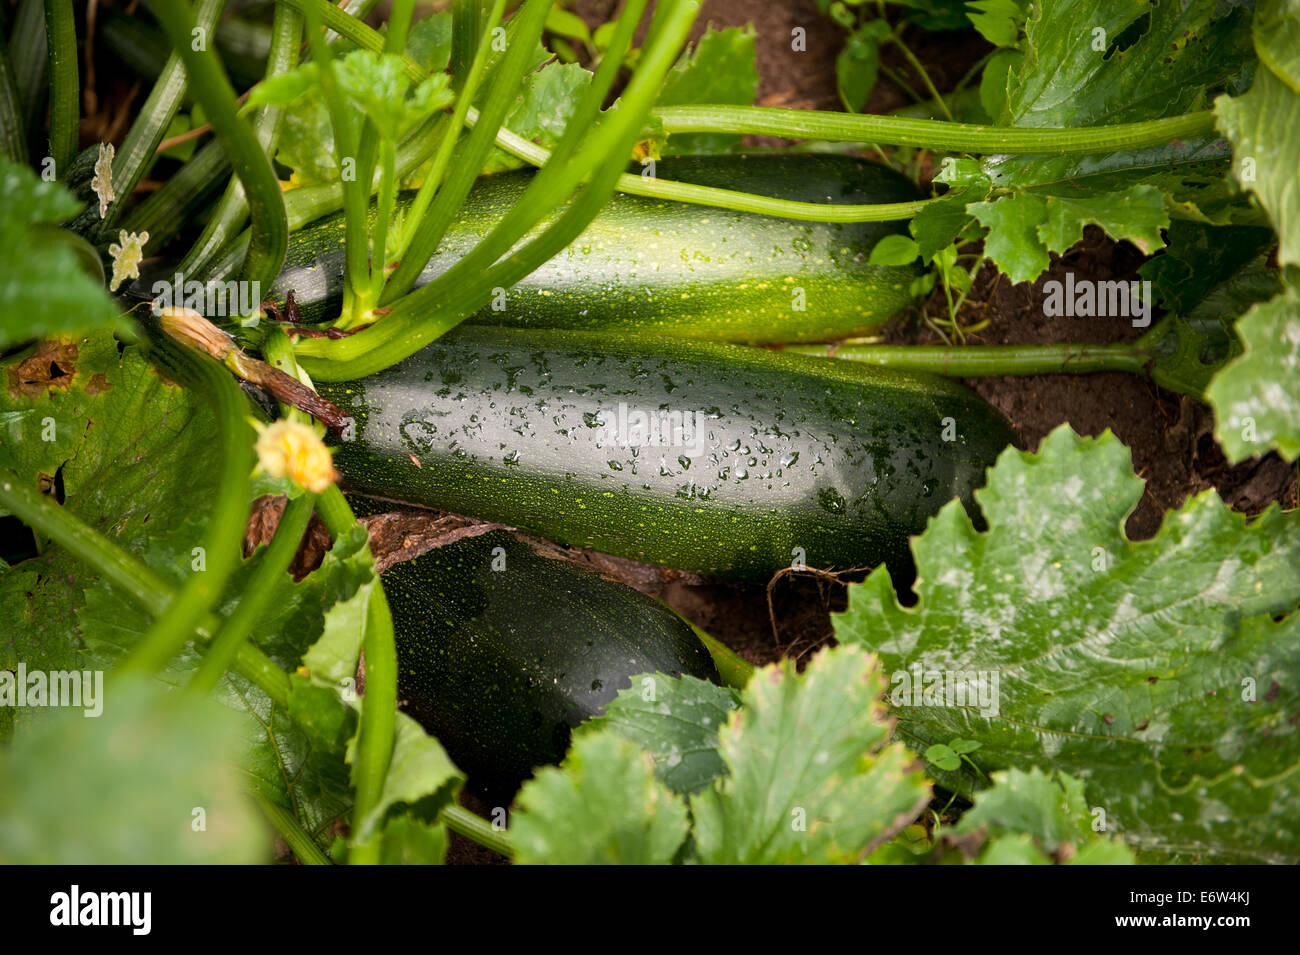 Zucchini or courgette vegetables Stock Photo